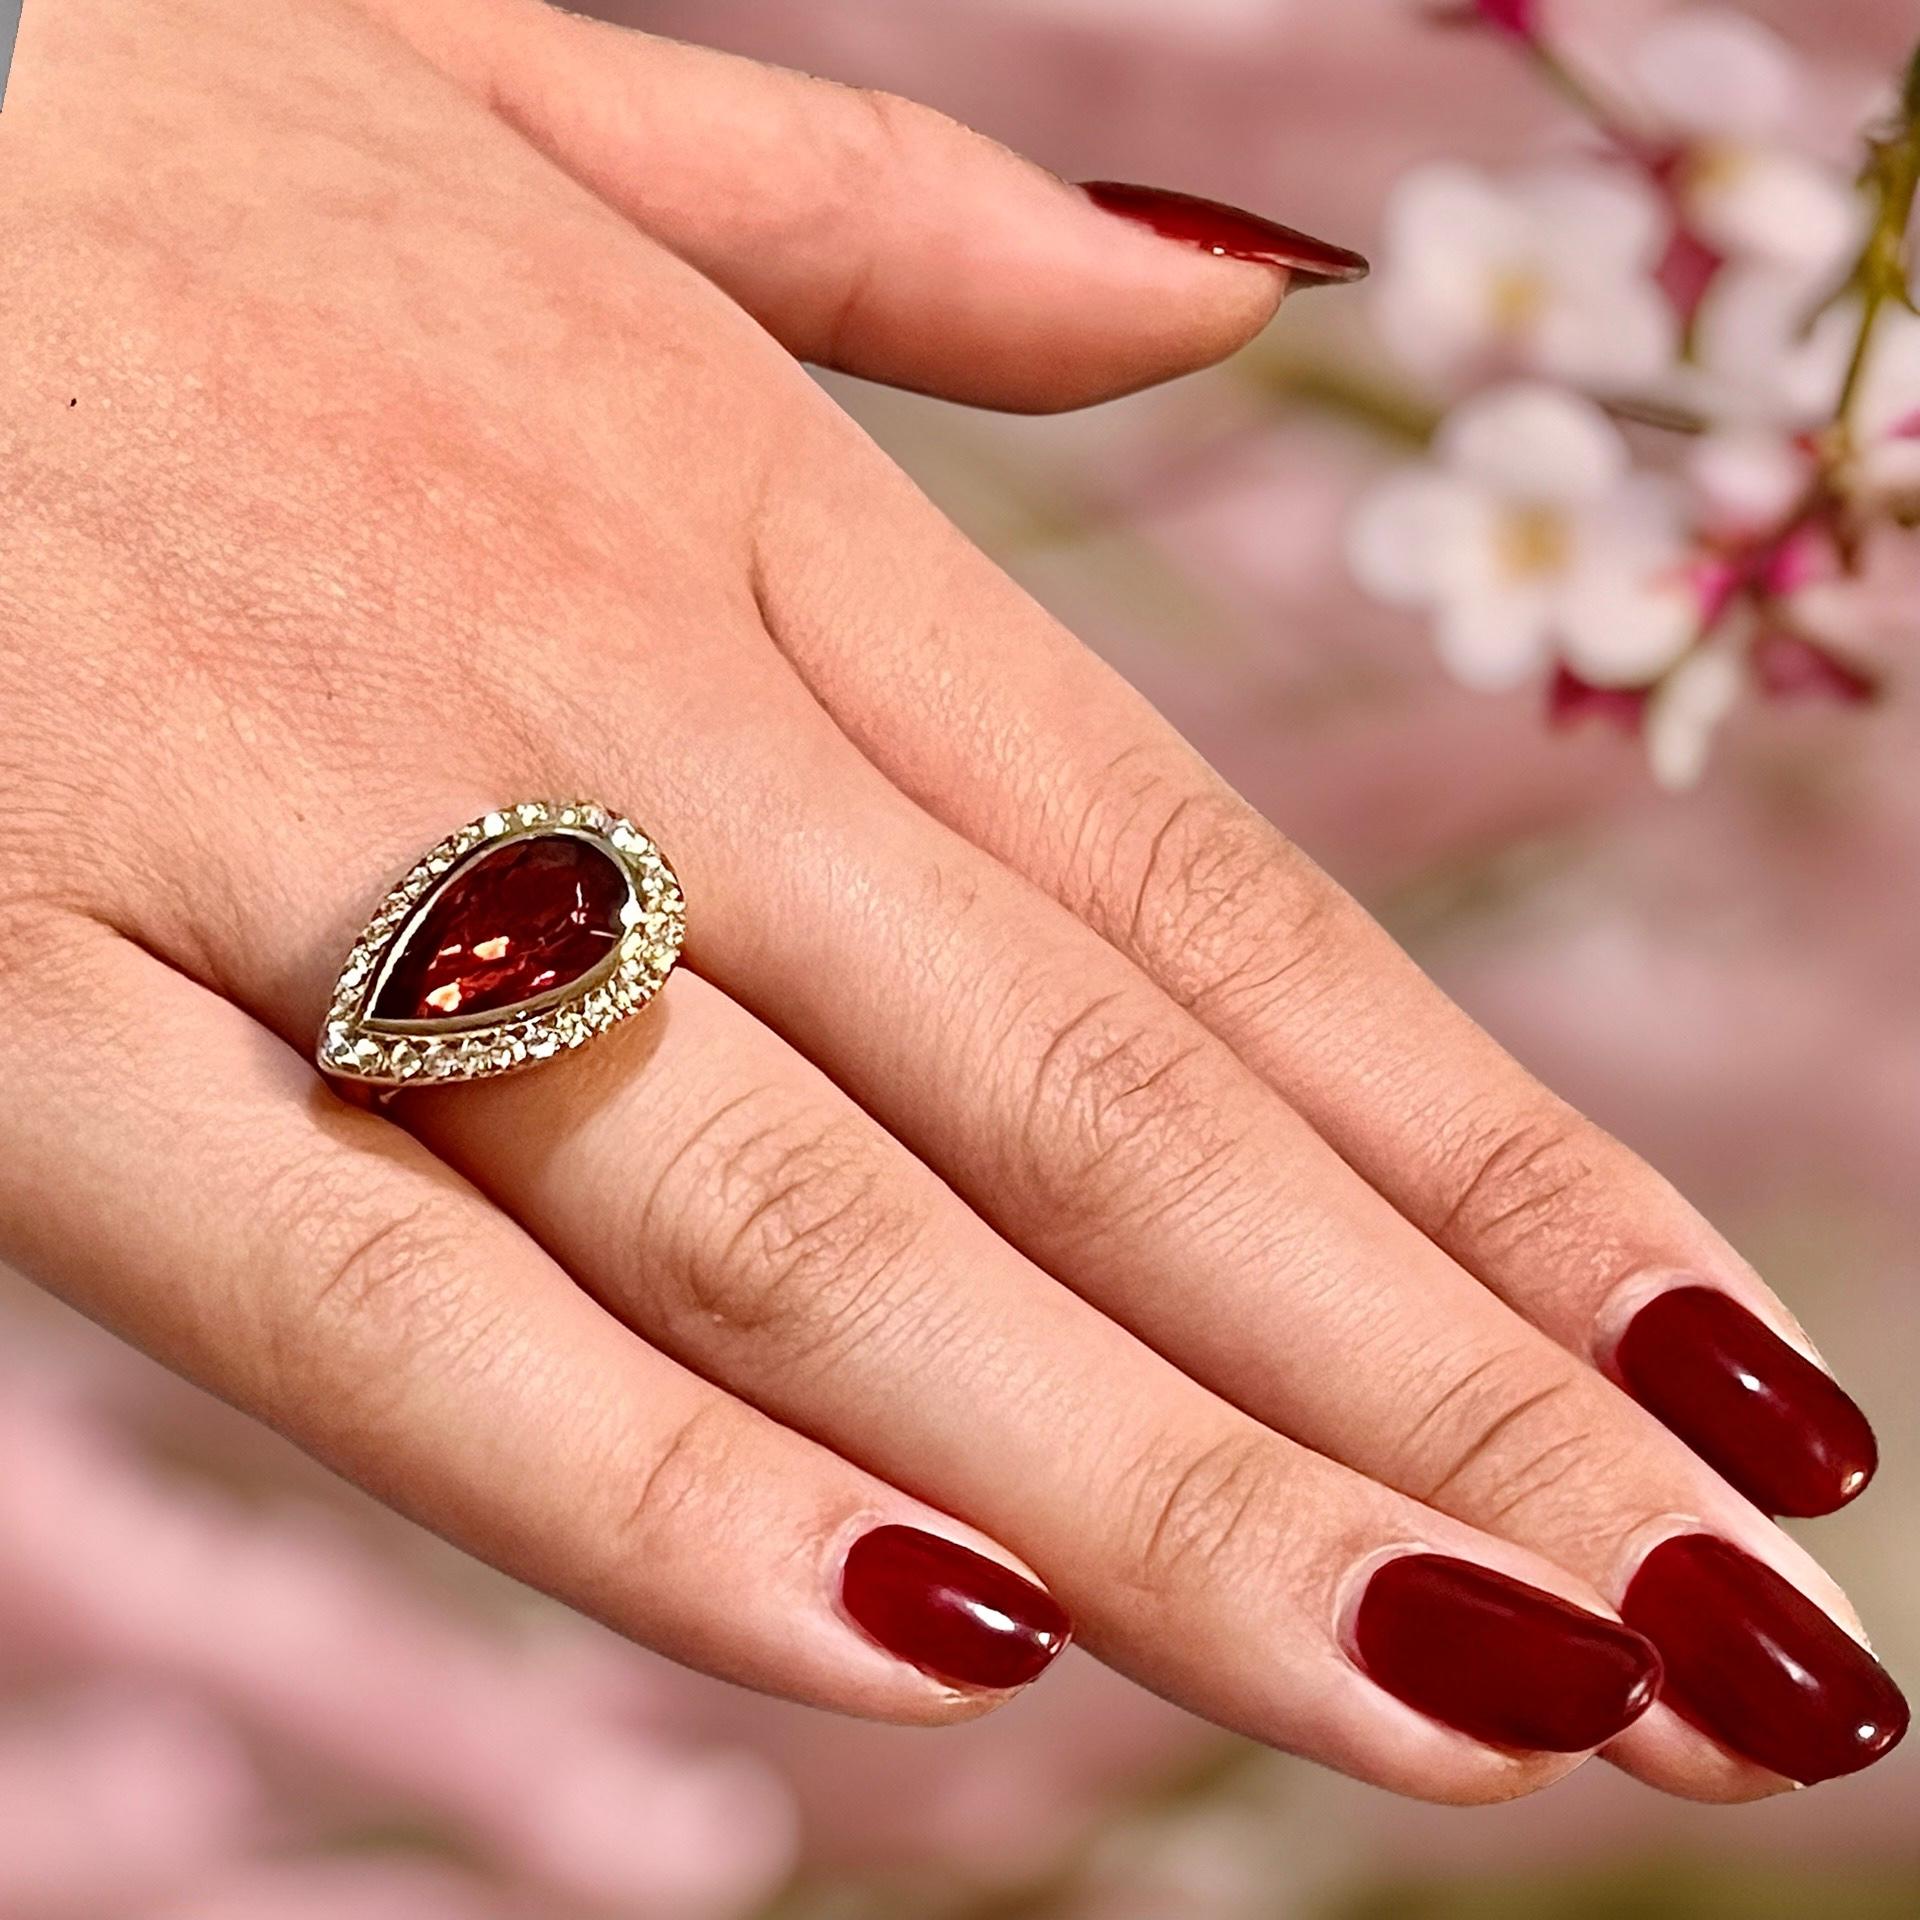 Natural Finely Faceted Quality Rubellite Diamond Ring 6.5 14k Y Gold 4.68 TCW Certified $5,950 310648

This is a Unique Custom Made Glamorous Piece of Jewelry!

Nothing says, “I Love you” more than Diamonds and Pearls!

This Rubellite ring has been